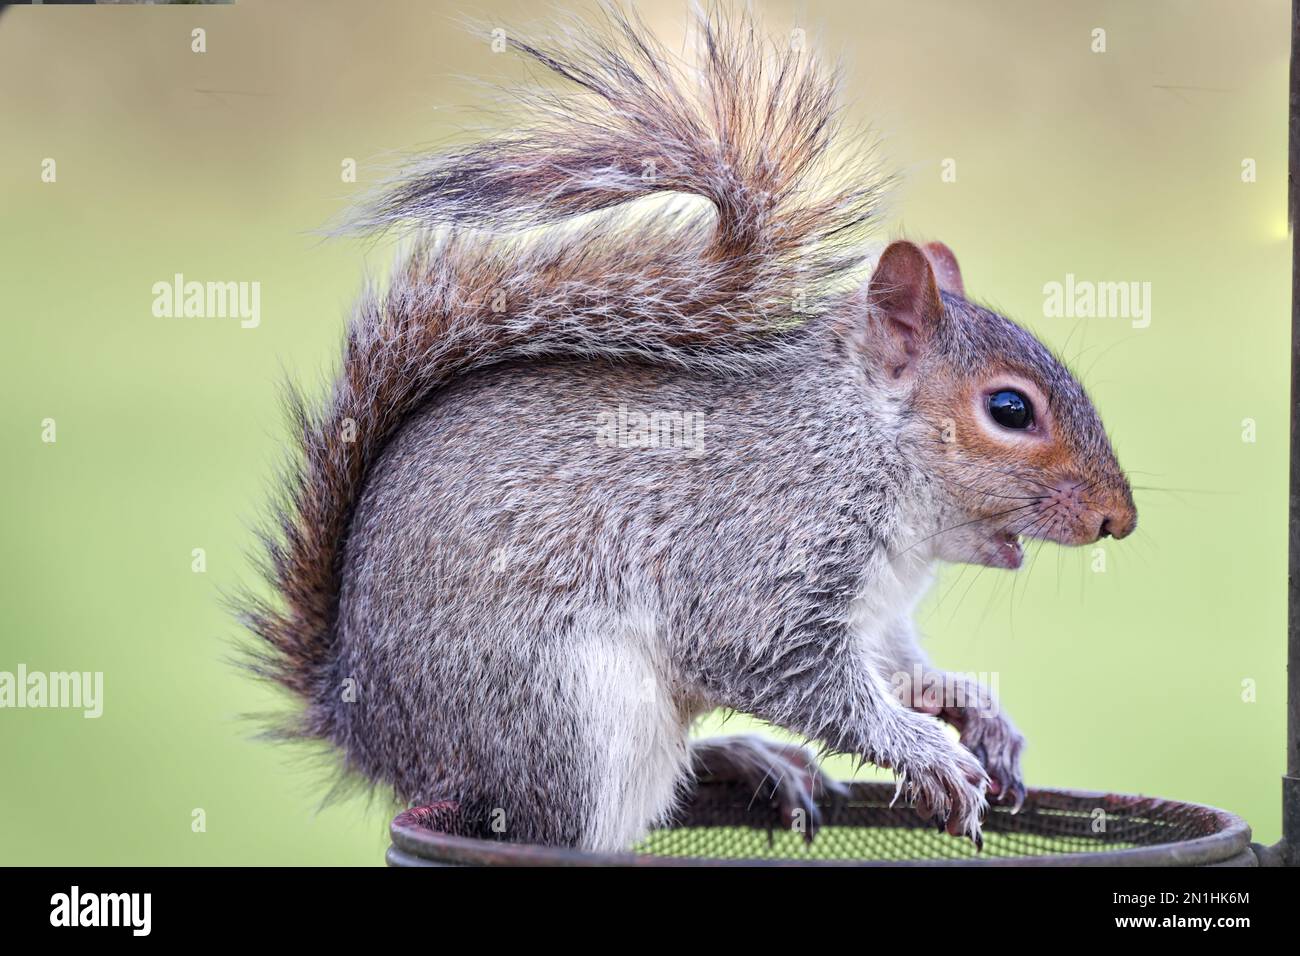 A side view of a grey Squirrel, Sciurus carolinensis side view with its mouth open and its tailed running up its back and curling at the end Stock Photo